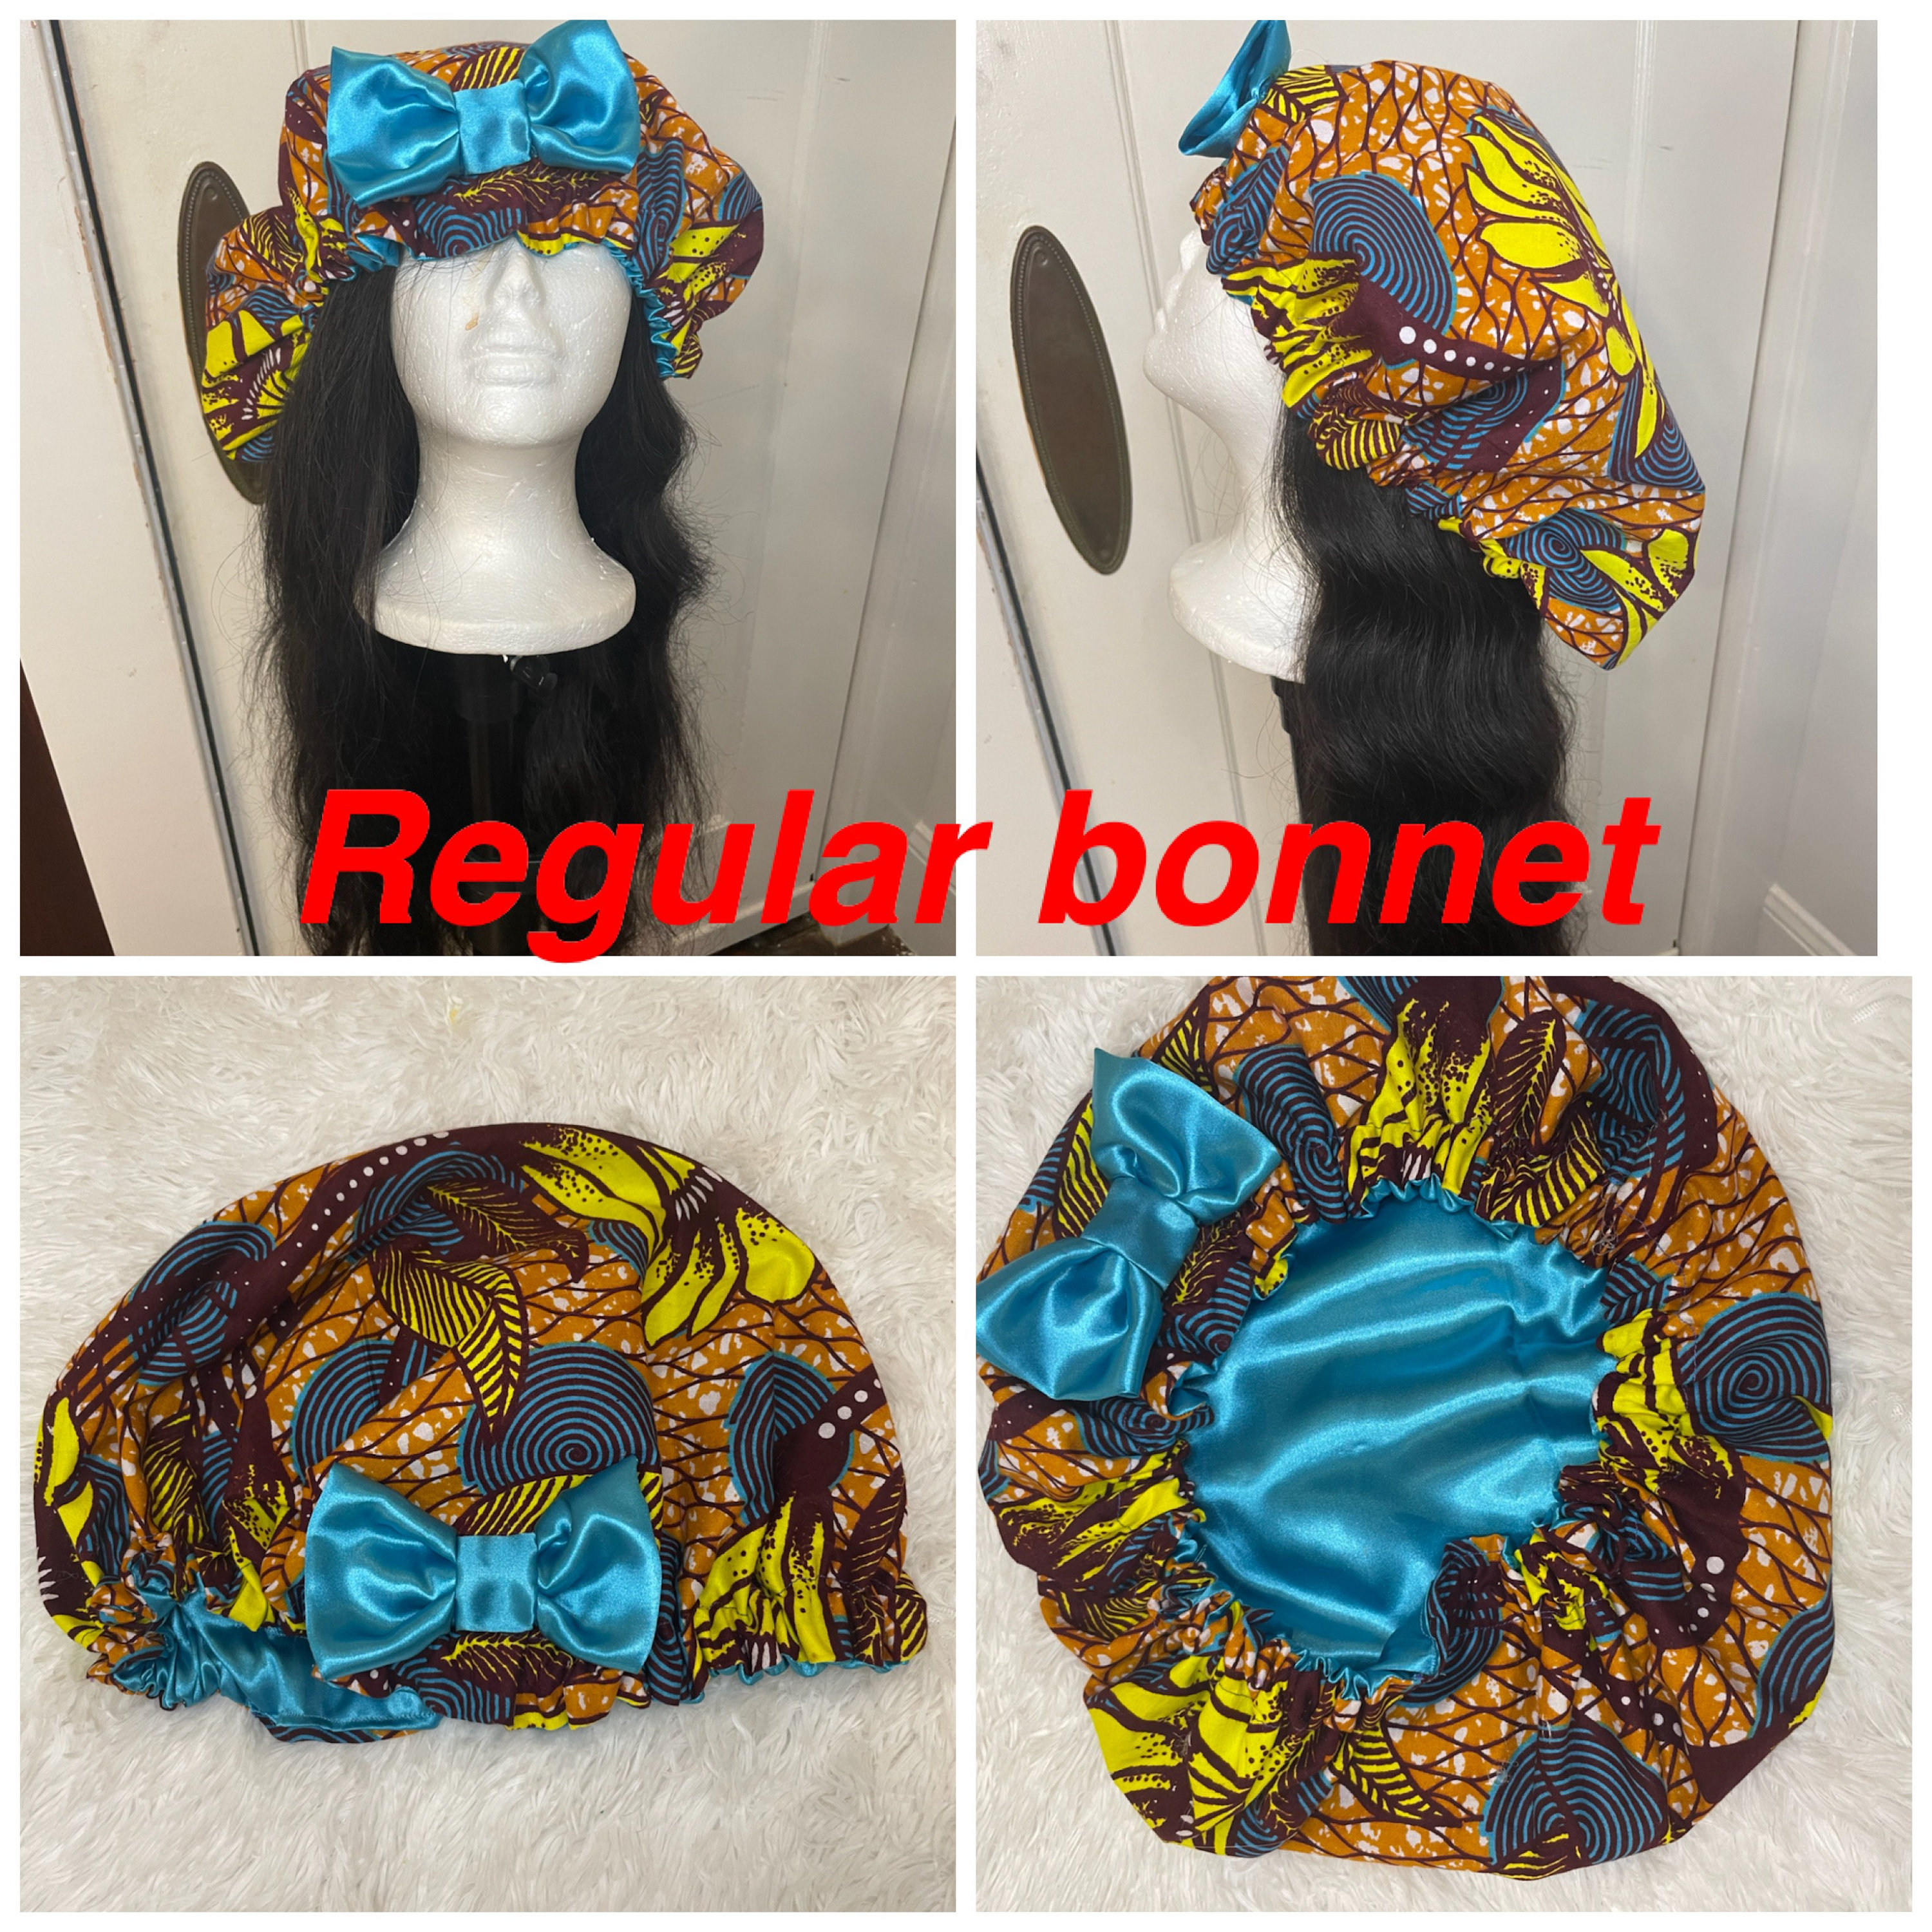 Designer Bonnets – Candy Lips by Cai